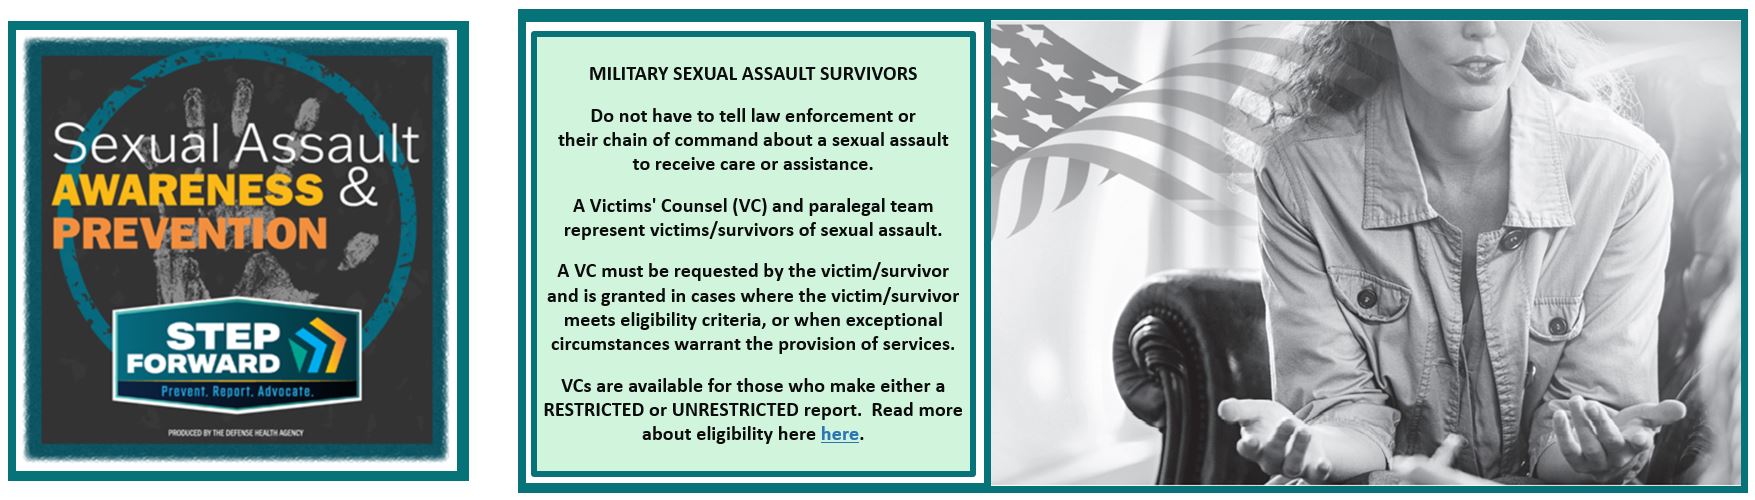 Military Sexual Assault Survivors do not have to involve law enforcement.  A Victims' Counsel and paralegal represent victims and survivors.  Click to learn more about a Victims' Counsel.